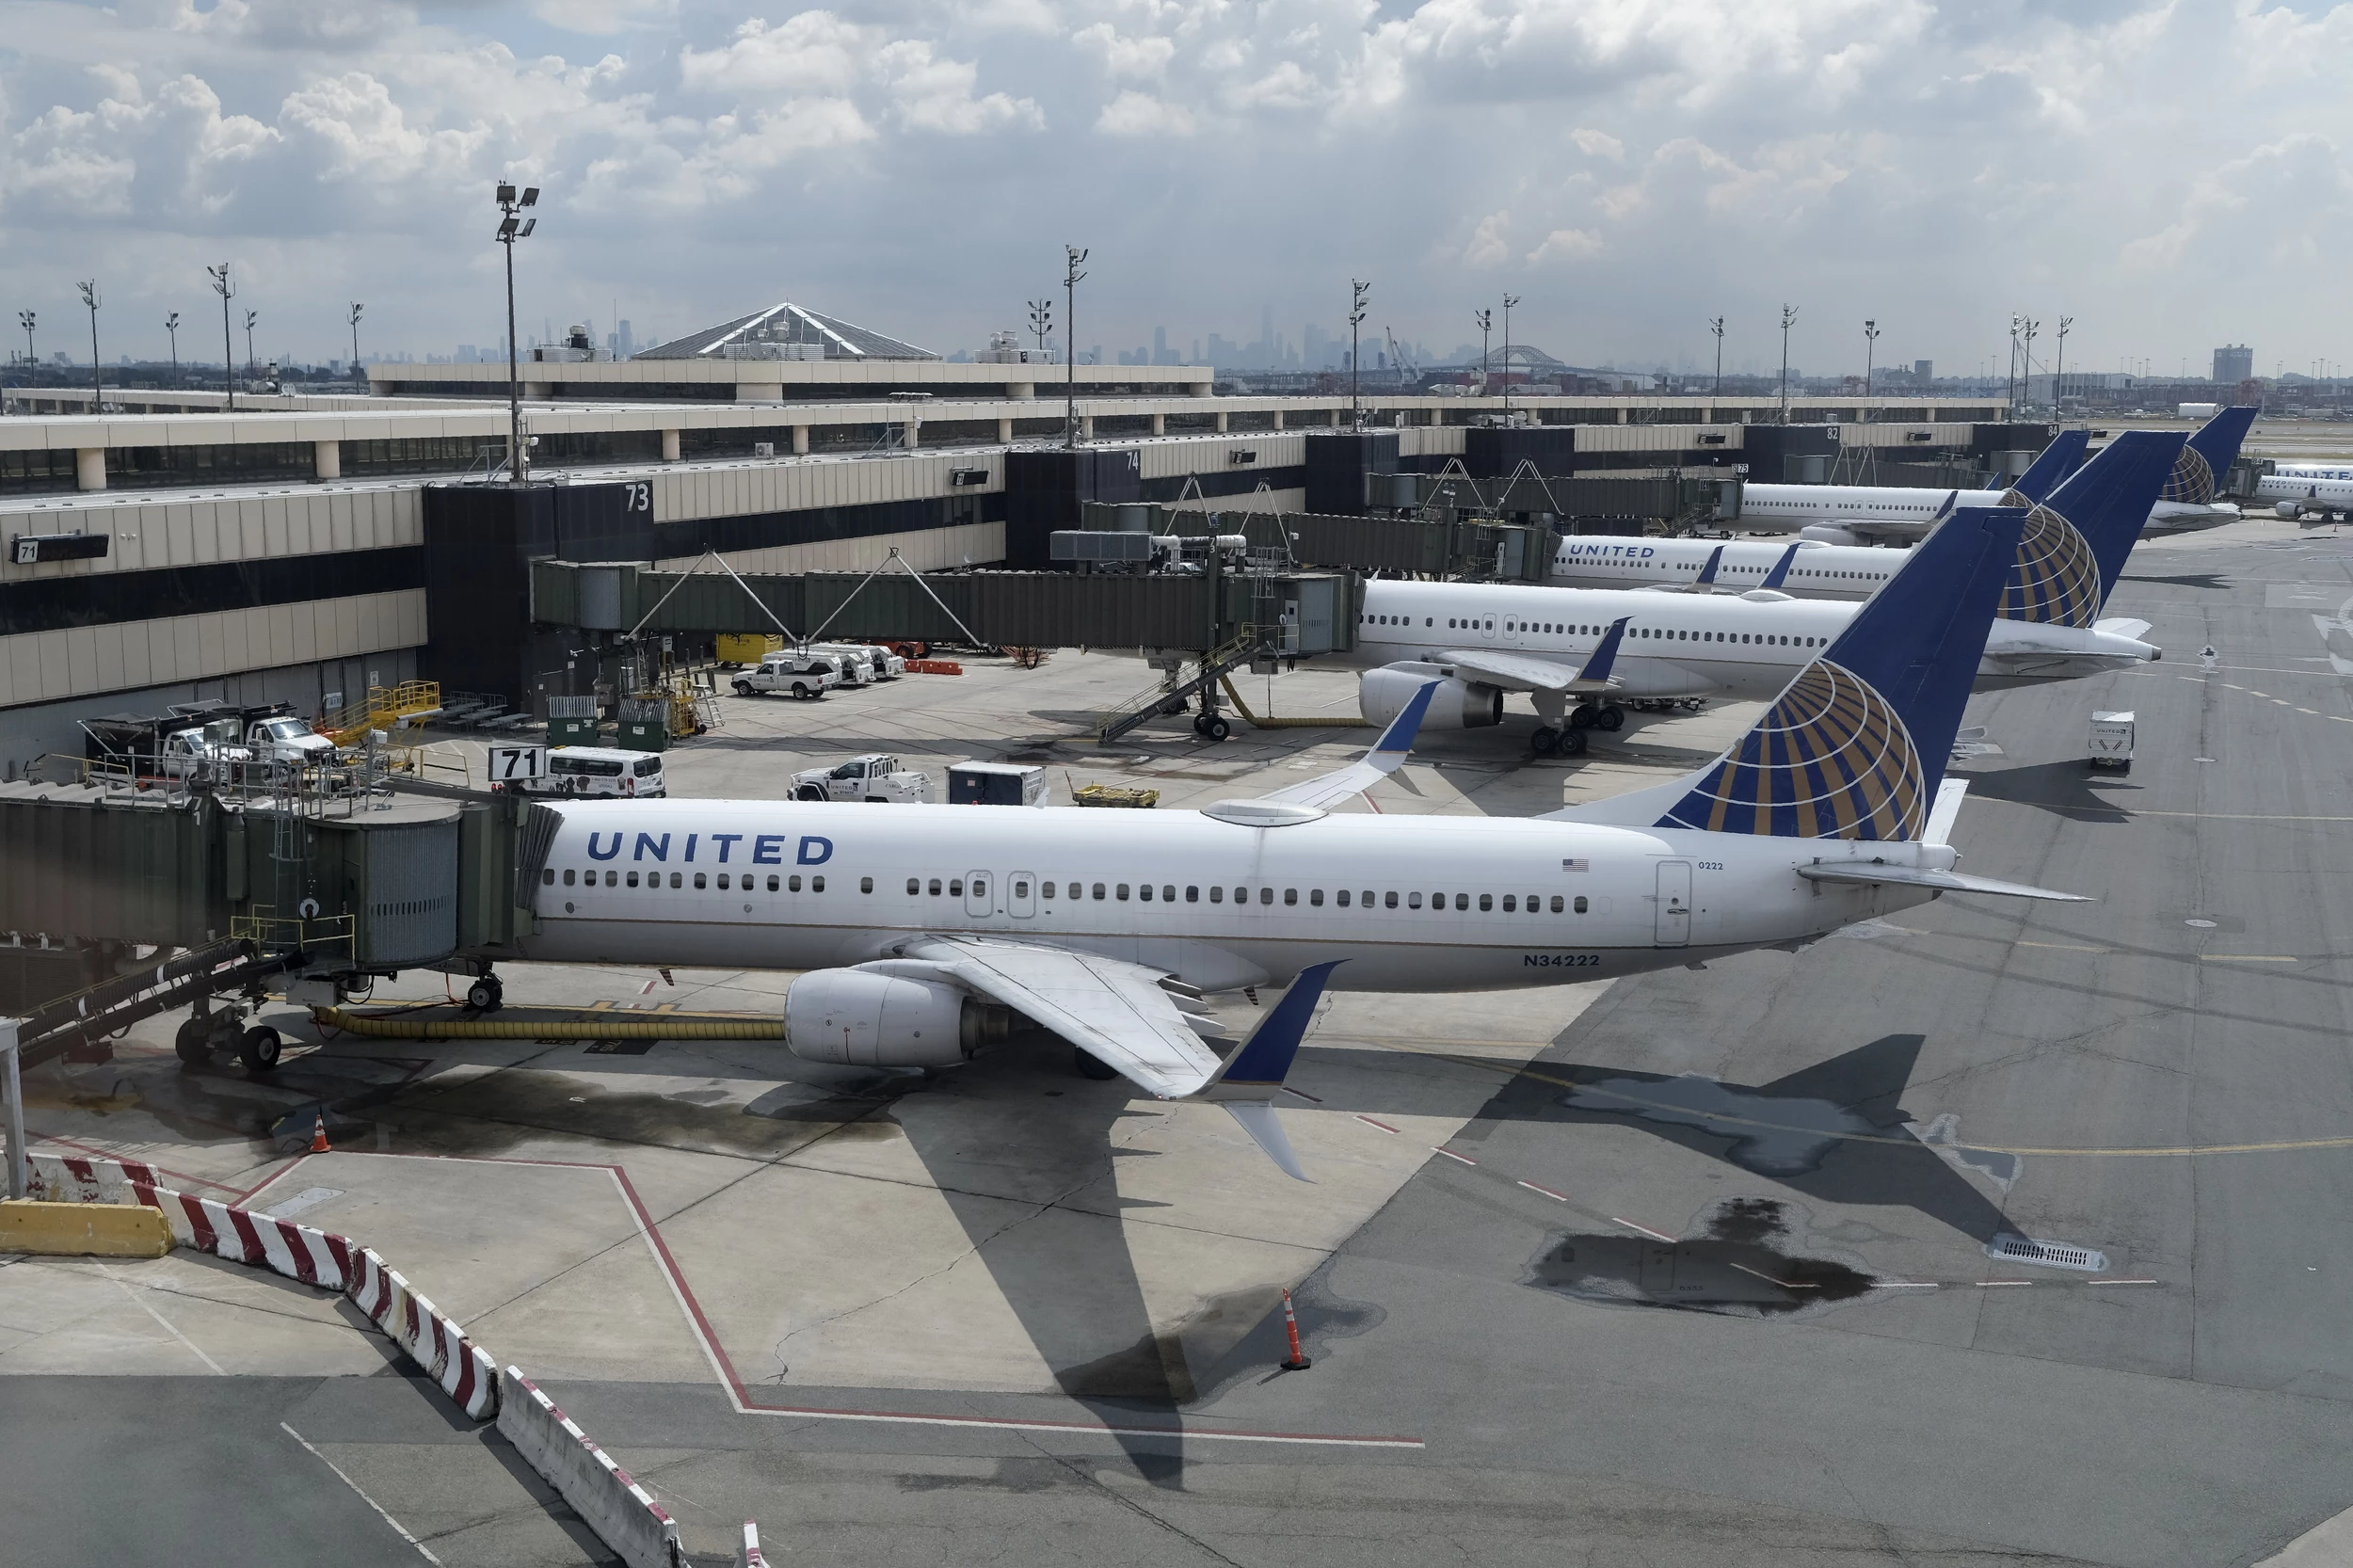 New flights from Newark, NJ Airport to Europe coming in 2023